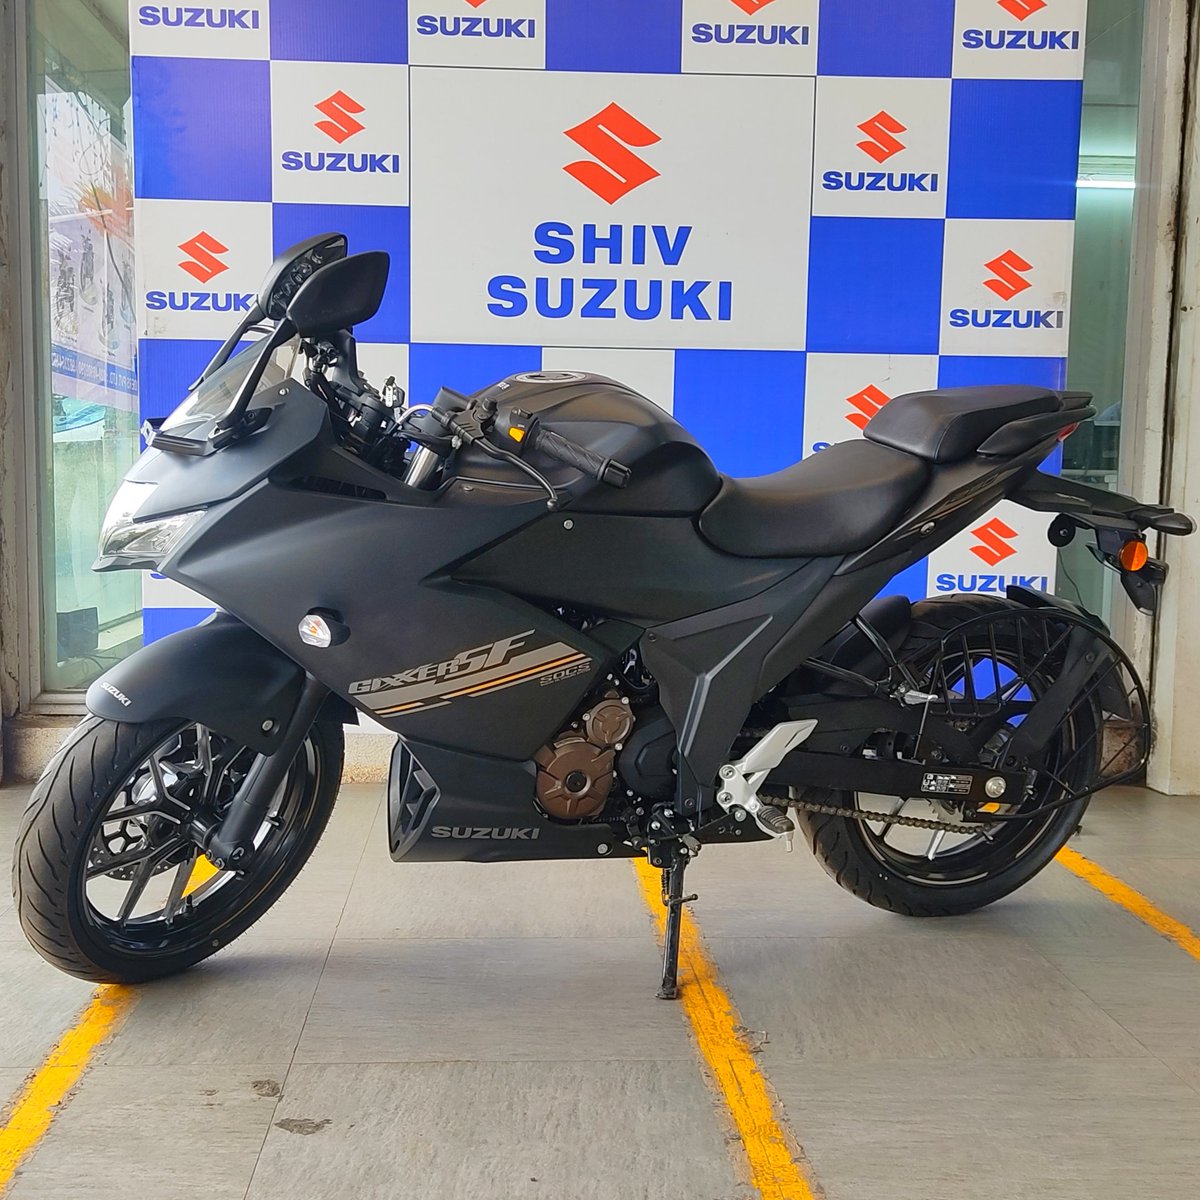 youtu.be/RS9tf5Bkg9M
2024 Suzuki Gixxer SF 250 Review Video is Live On My YouTube Channel
#gixxersf #suzukigixxersf #sf250